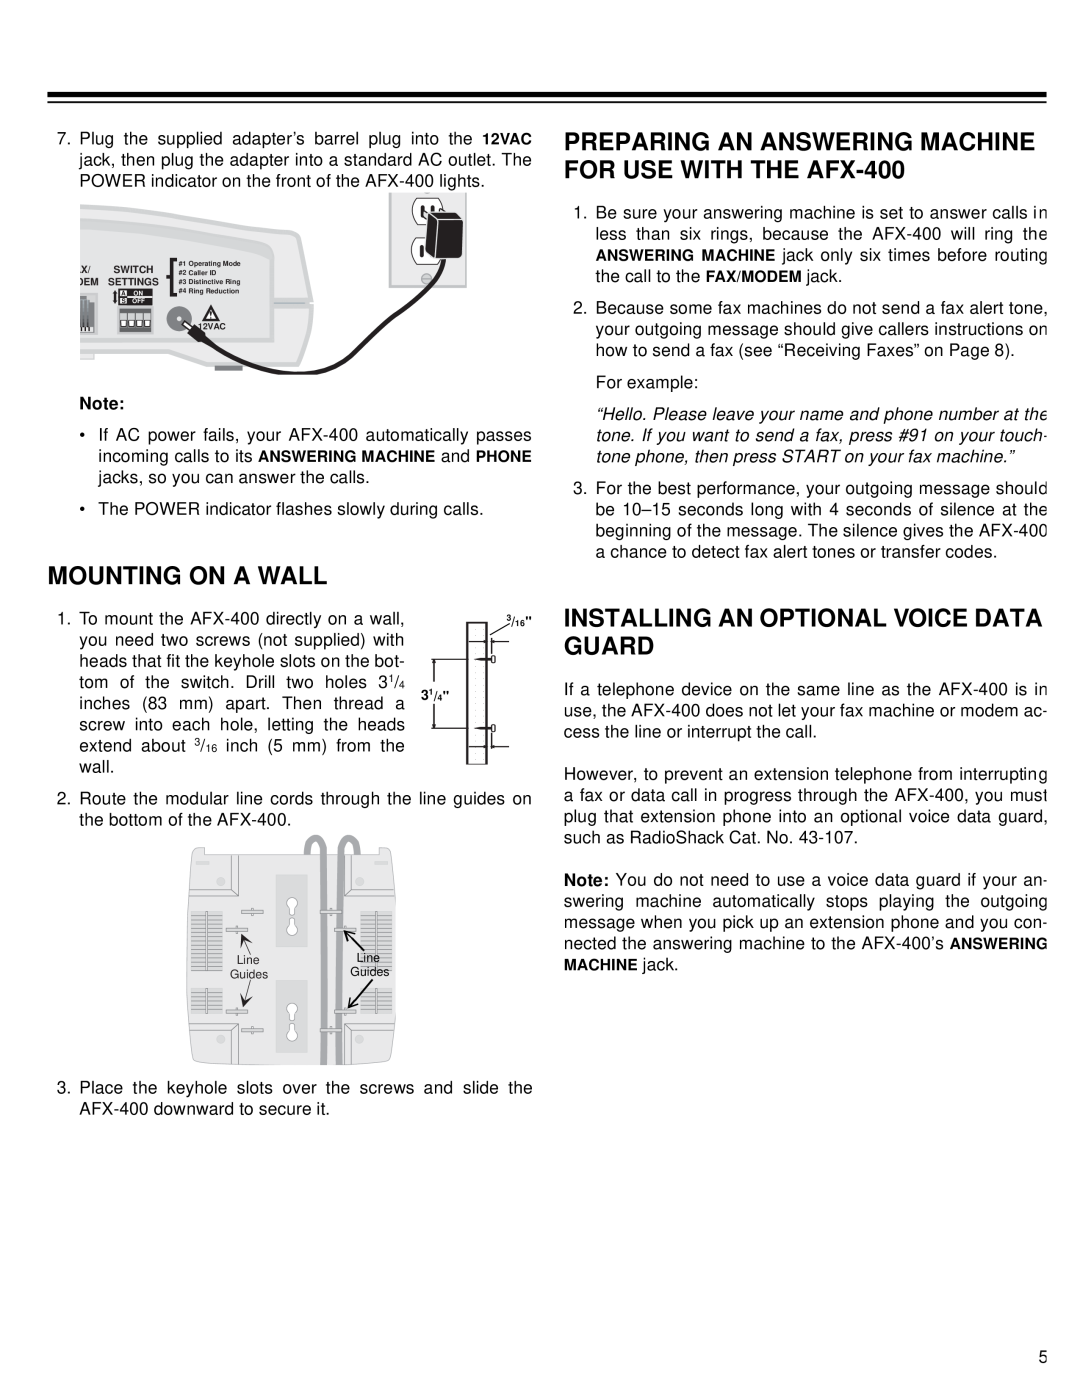 Radio Shack owner manual Mounting On A Wall, PREPARING AN ANSWERING MACHINE FOR USE WITH THE AFX-400 